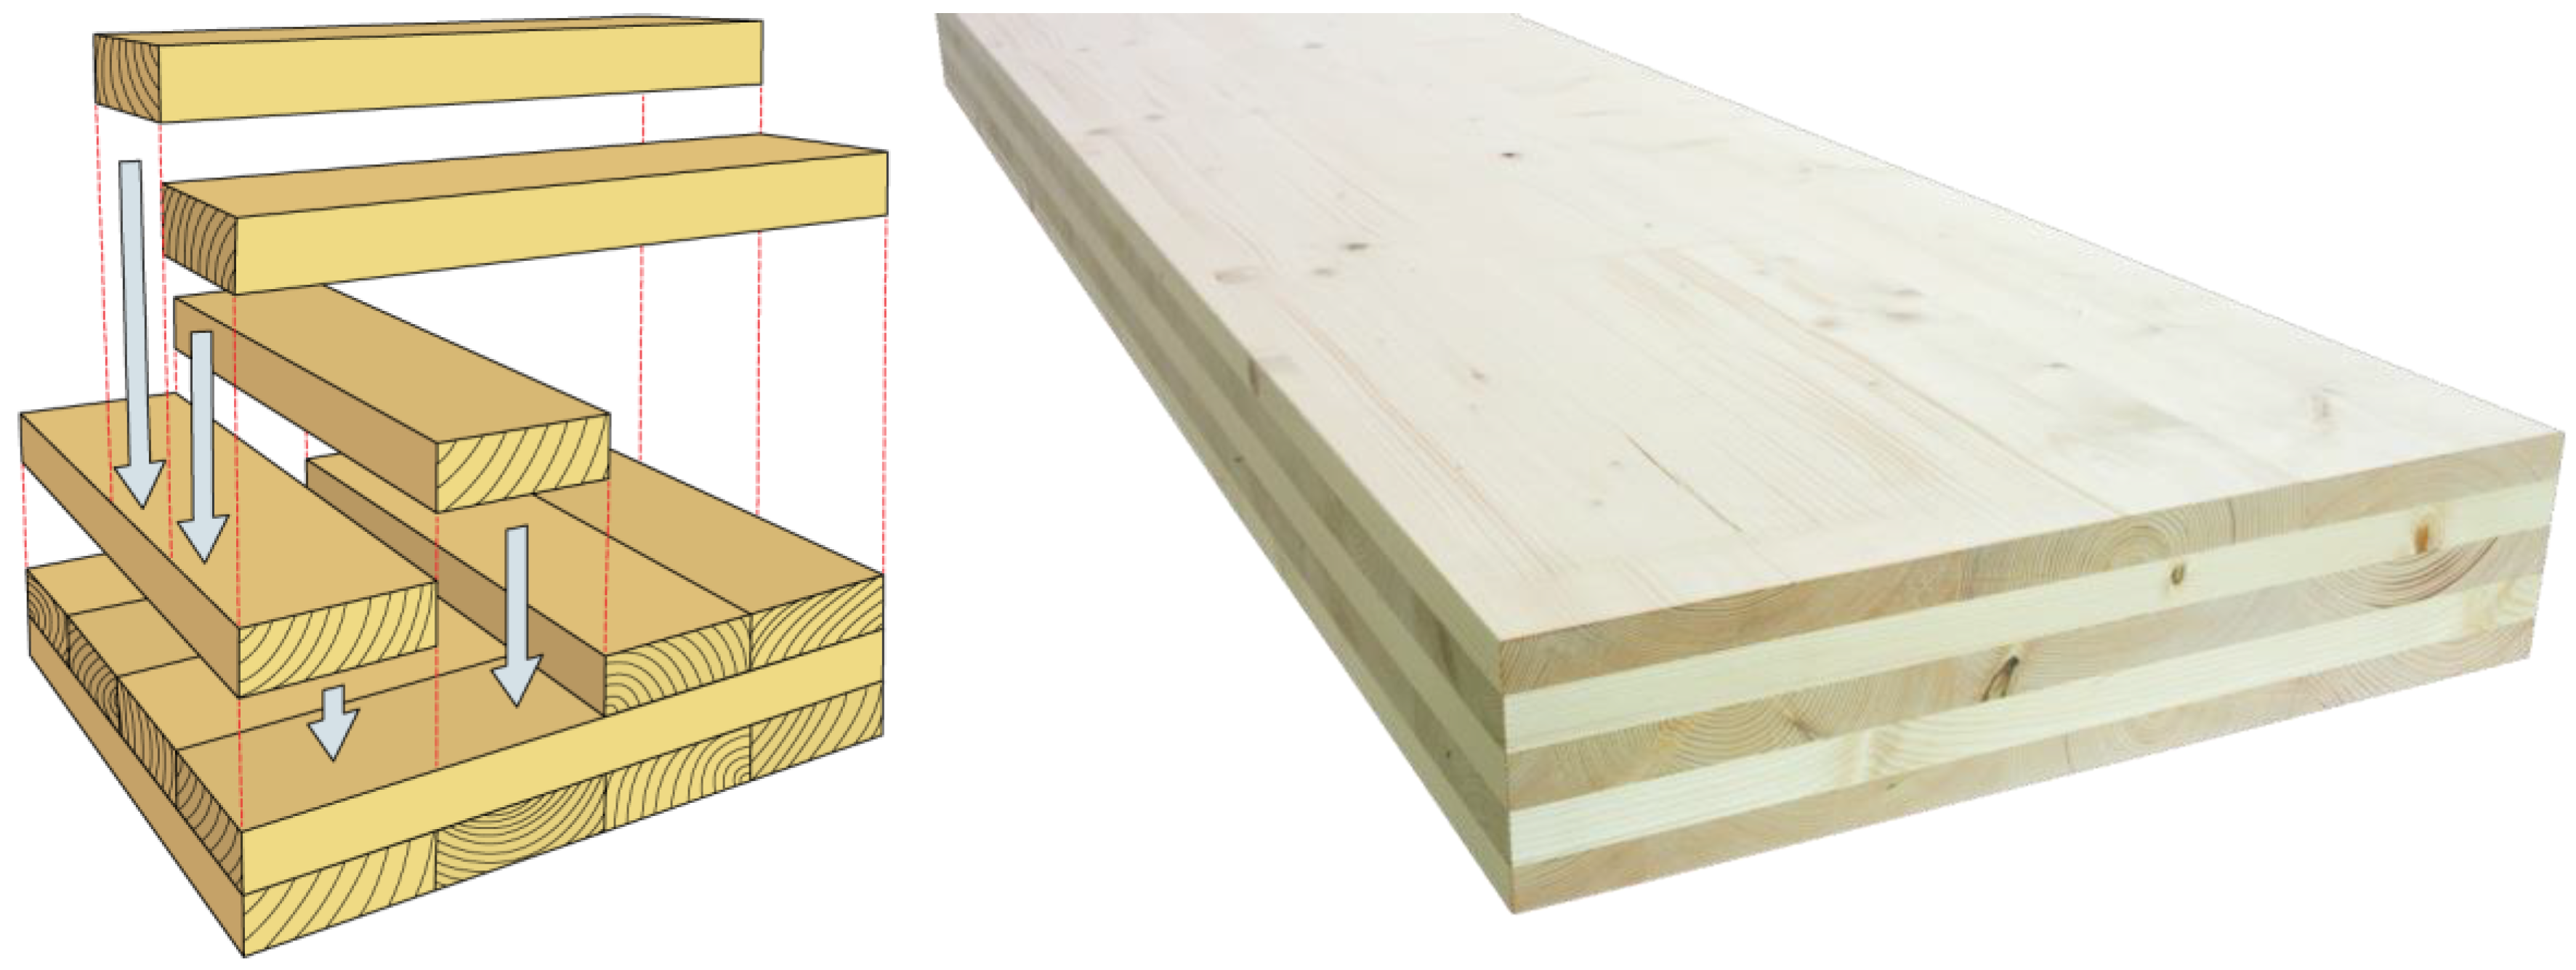 Sustainability | Free Full-Text | Acoustic Characteristics of Cross-Laminated  Timber Systems | HTML